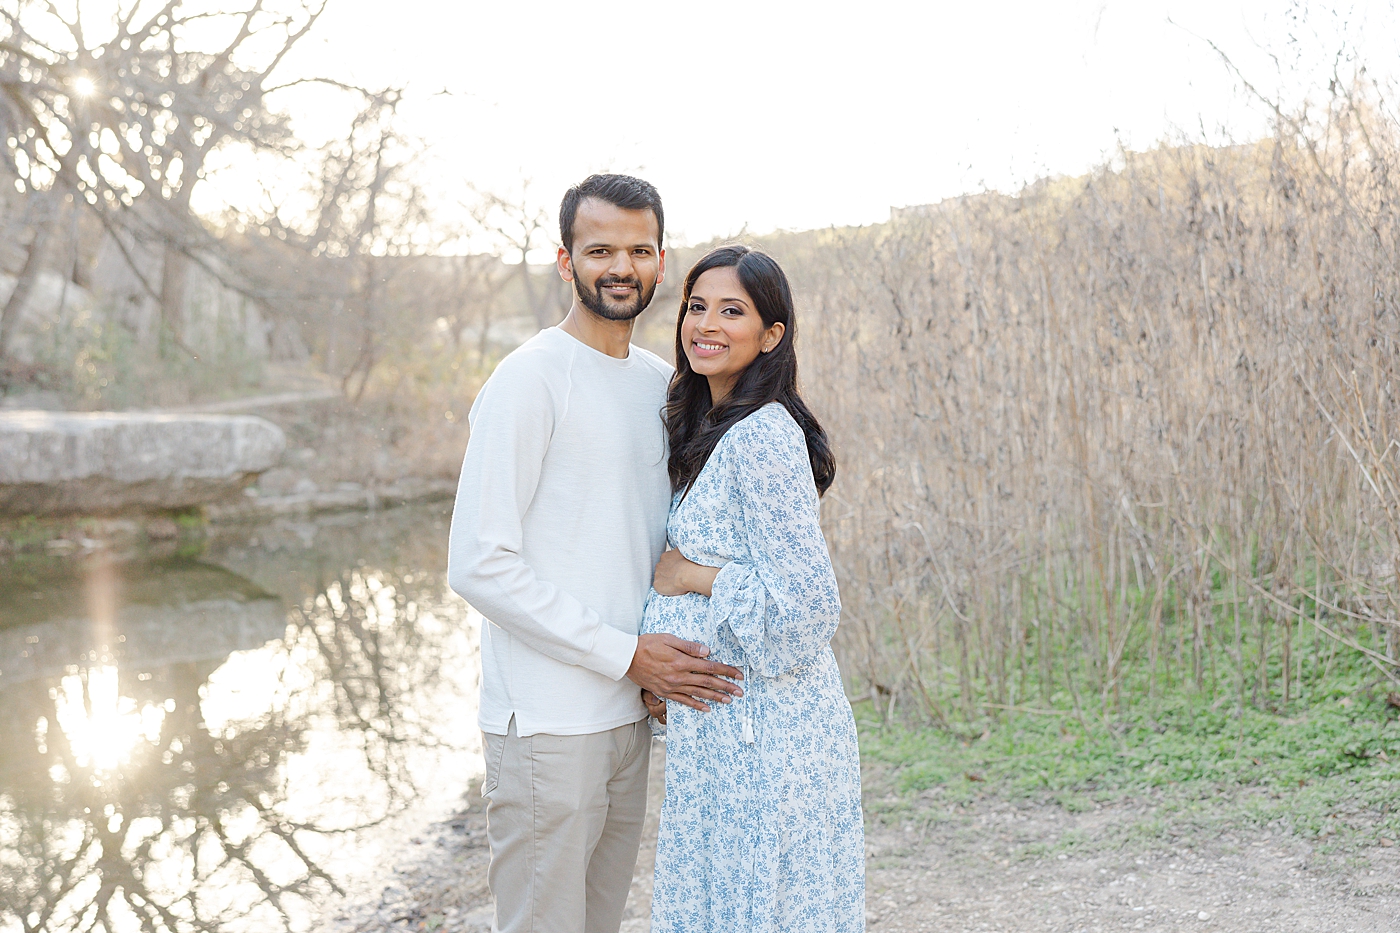 Mom and dad to be smiling in the park during their Austin Maternity Session| Images by Sana Ahmed 